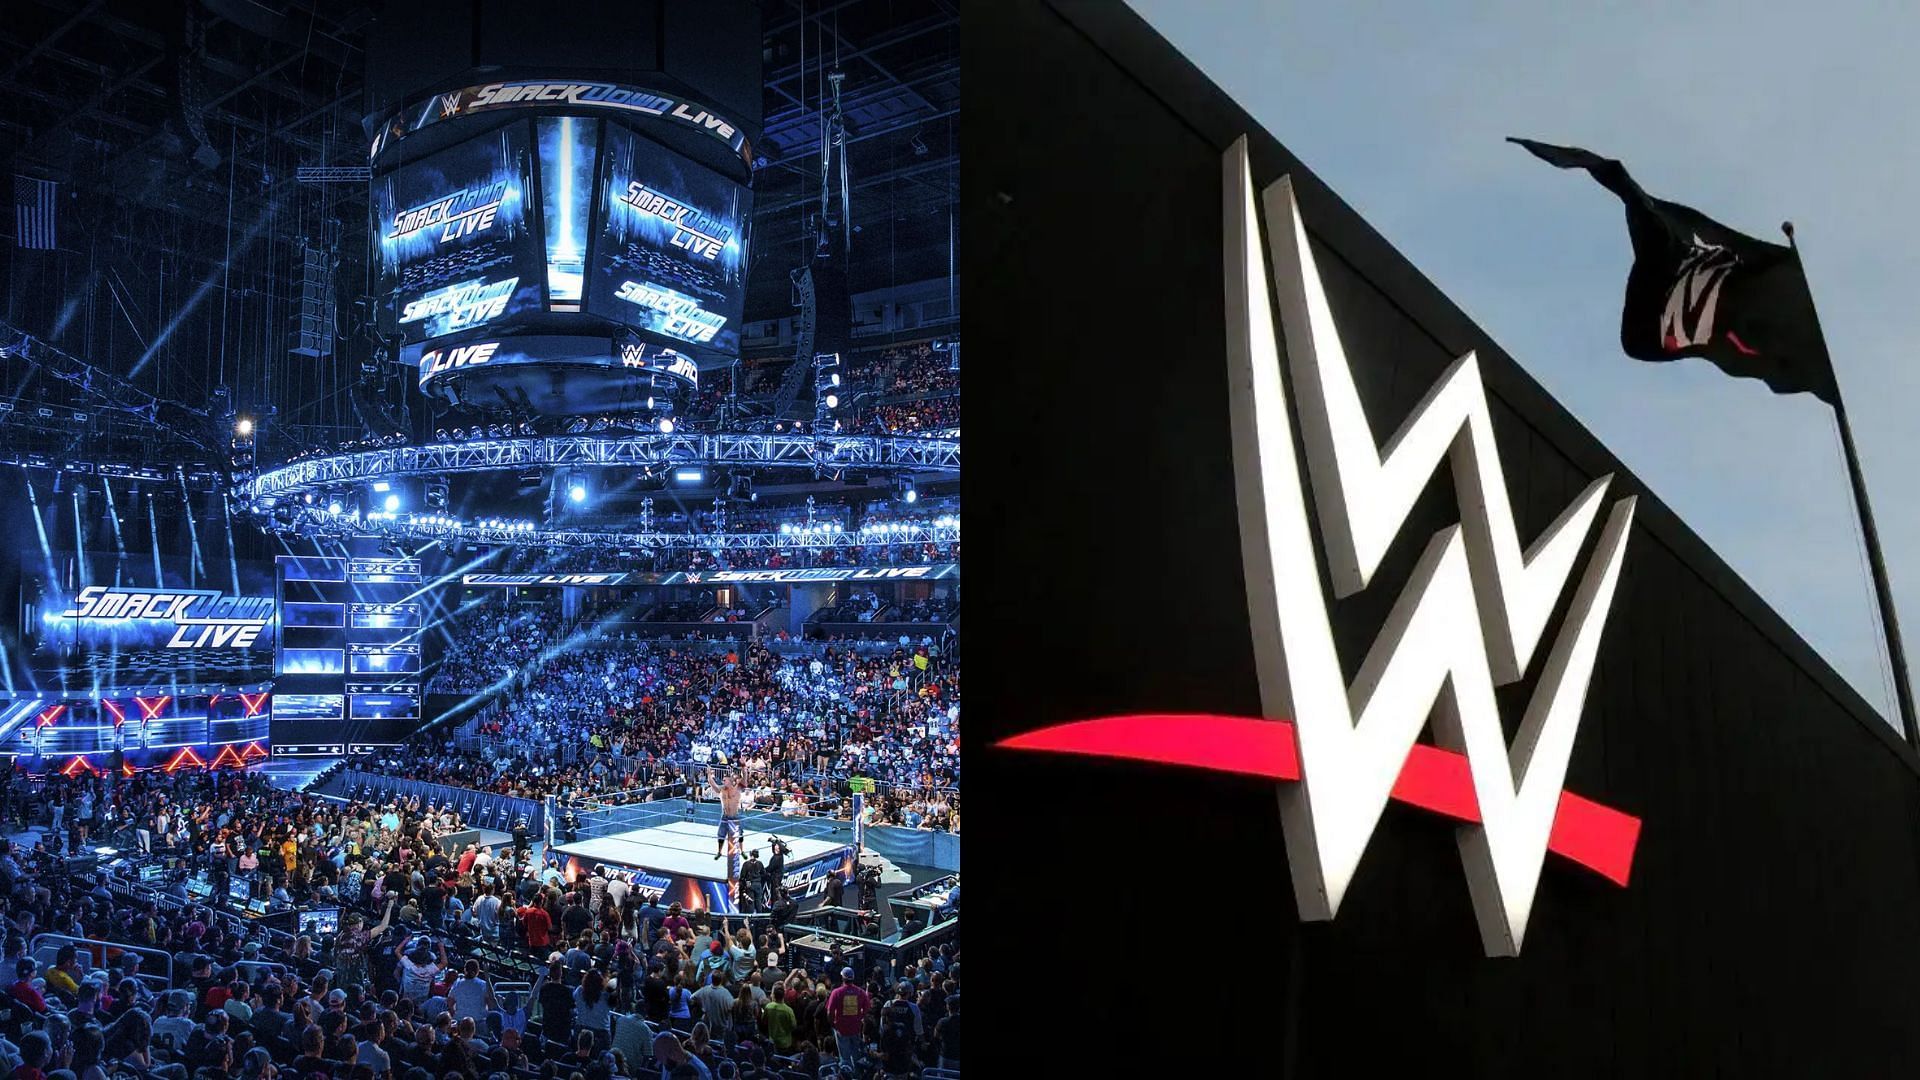 Which WWE star recently had a successful venture outside wrestling?